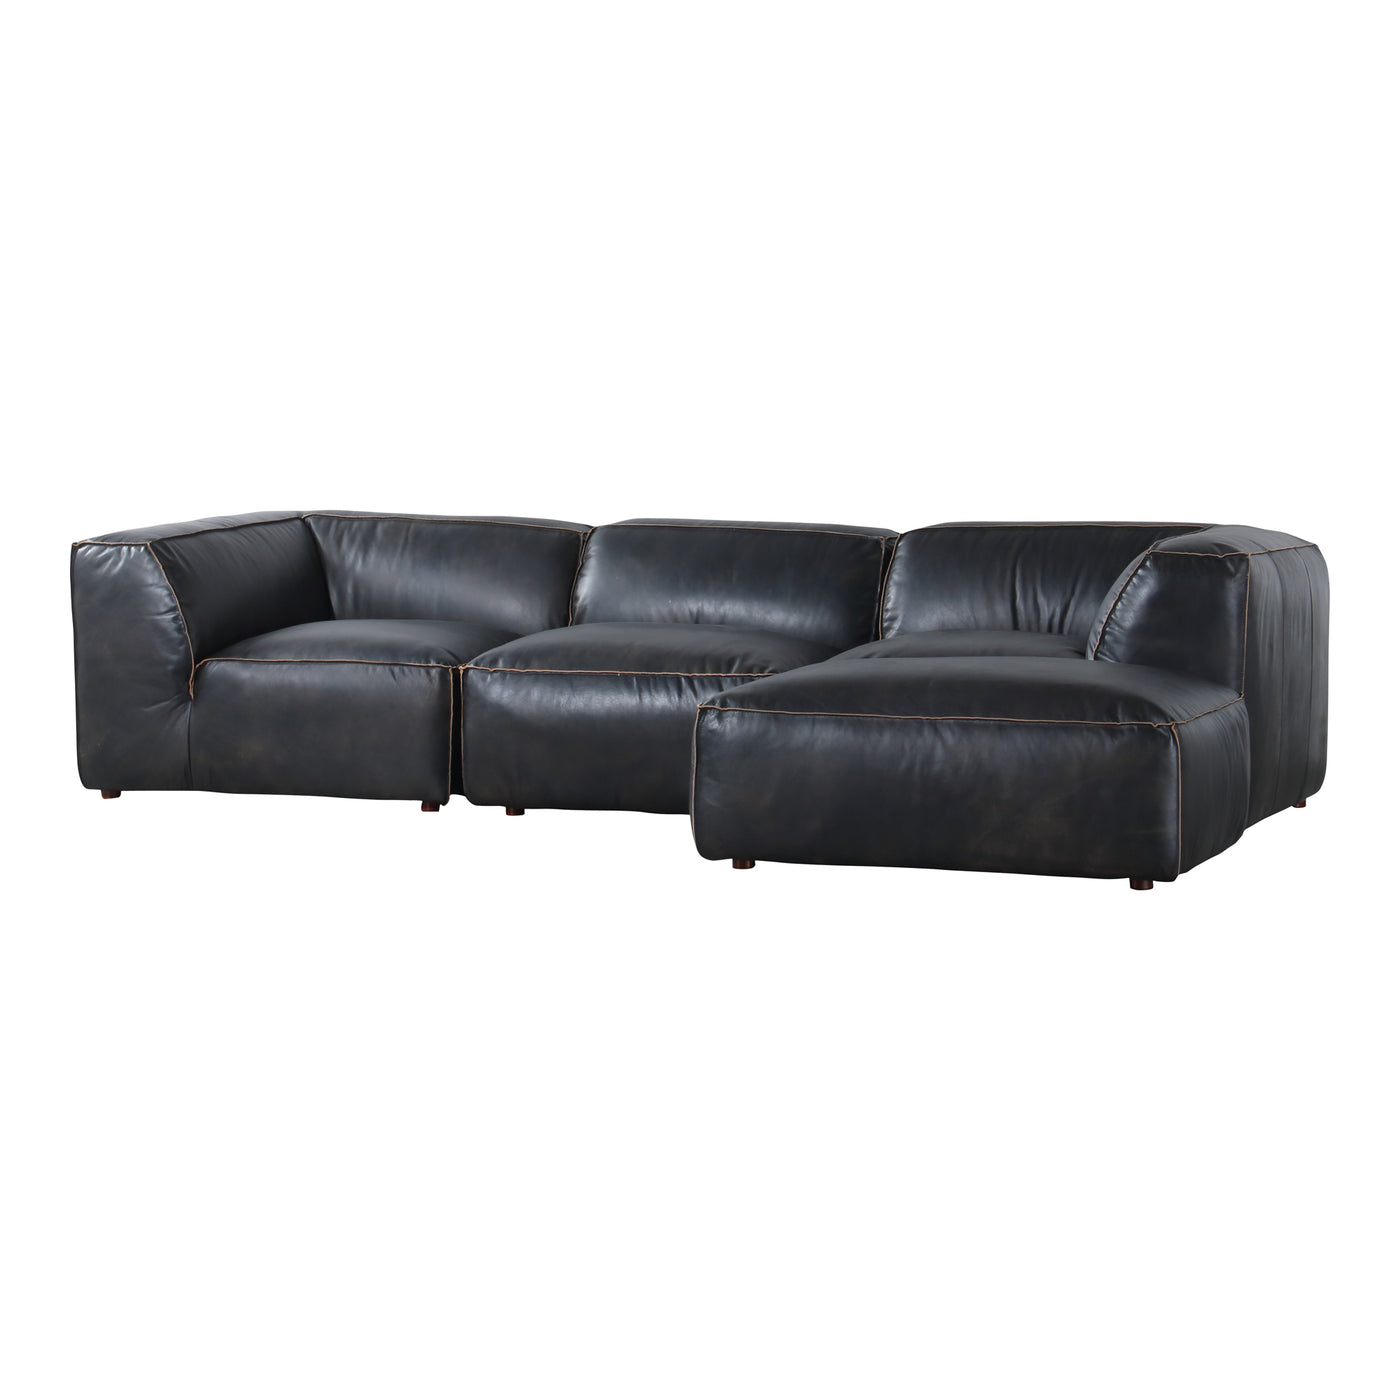 The Luxe Lounge sectional features top-grain leather upholstery that will age into a beautiful patina, with reverse stitch...